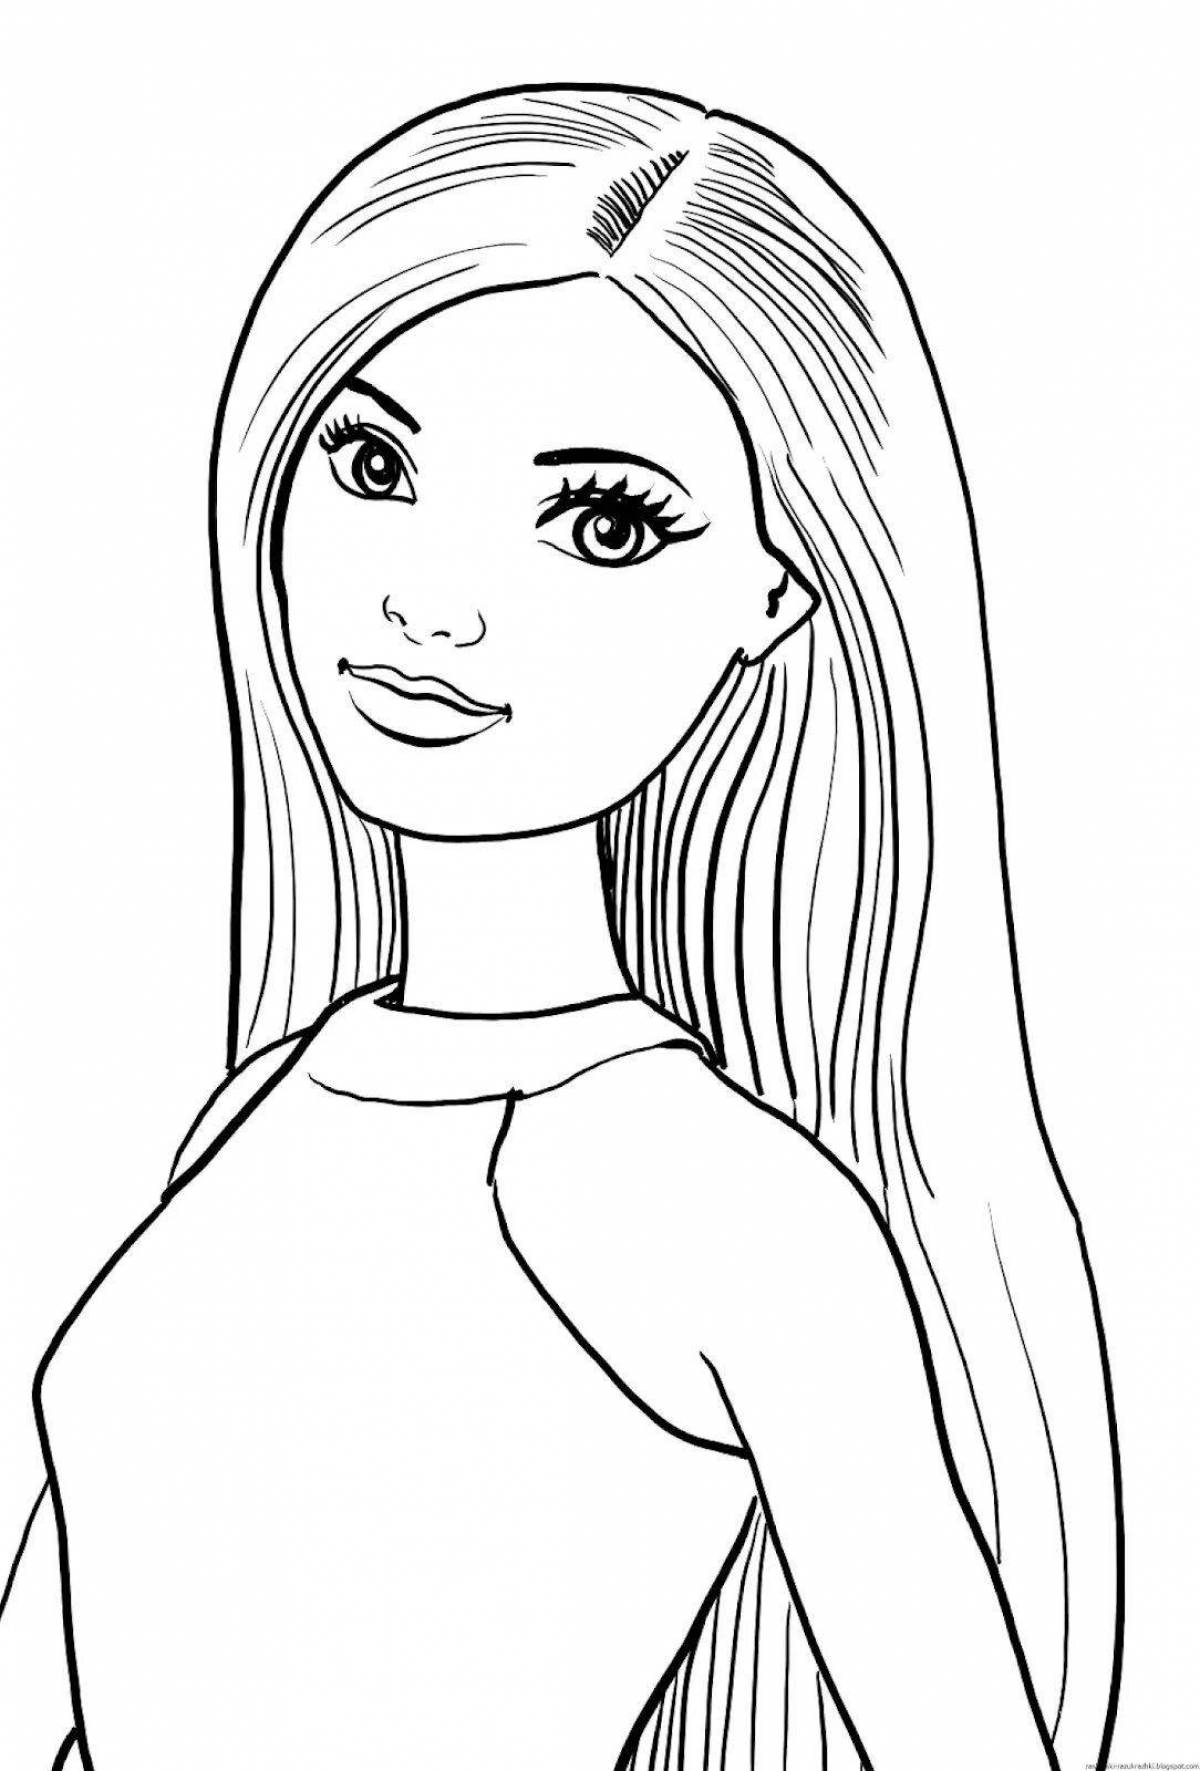 Animated 19 year old coloring page